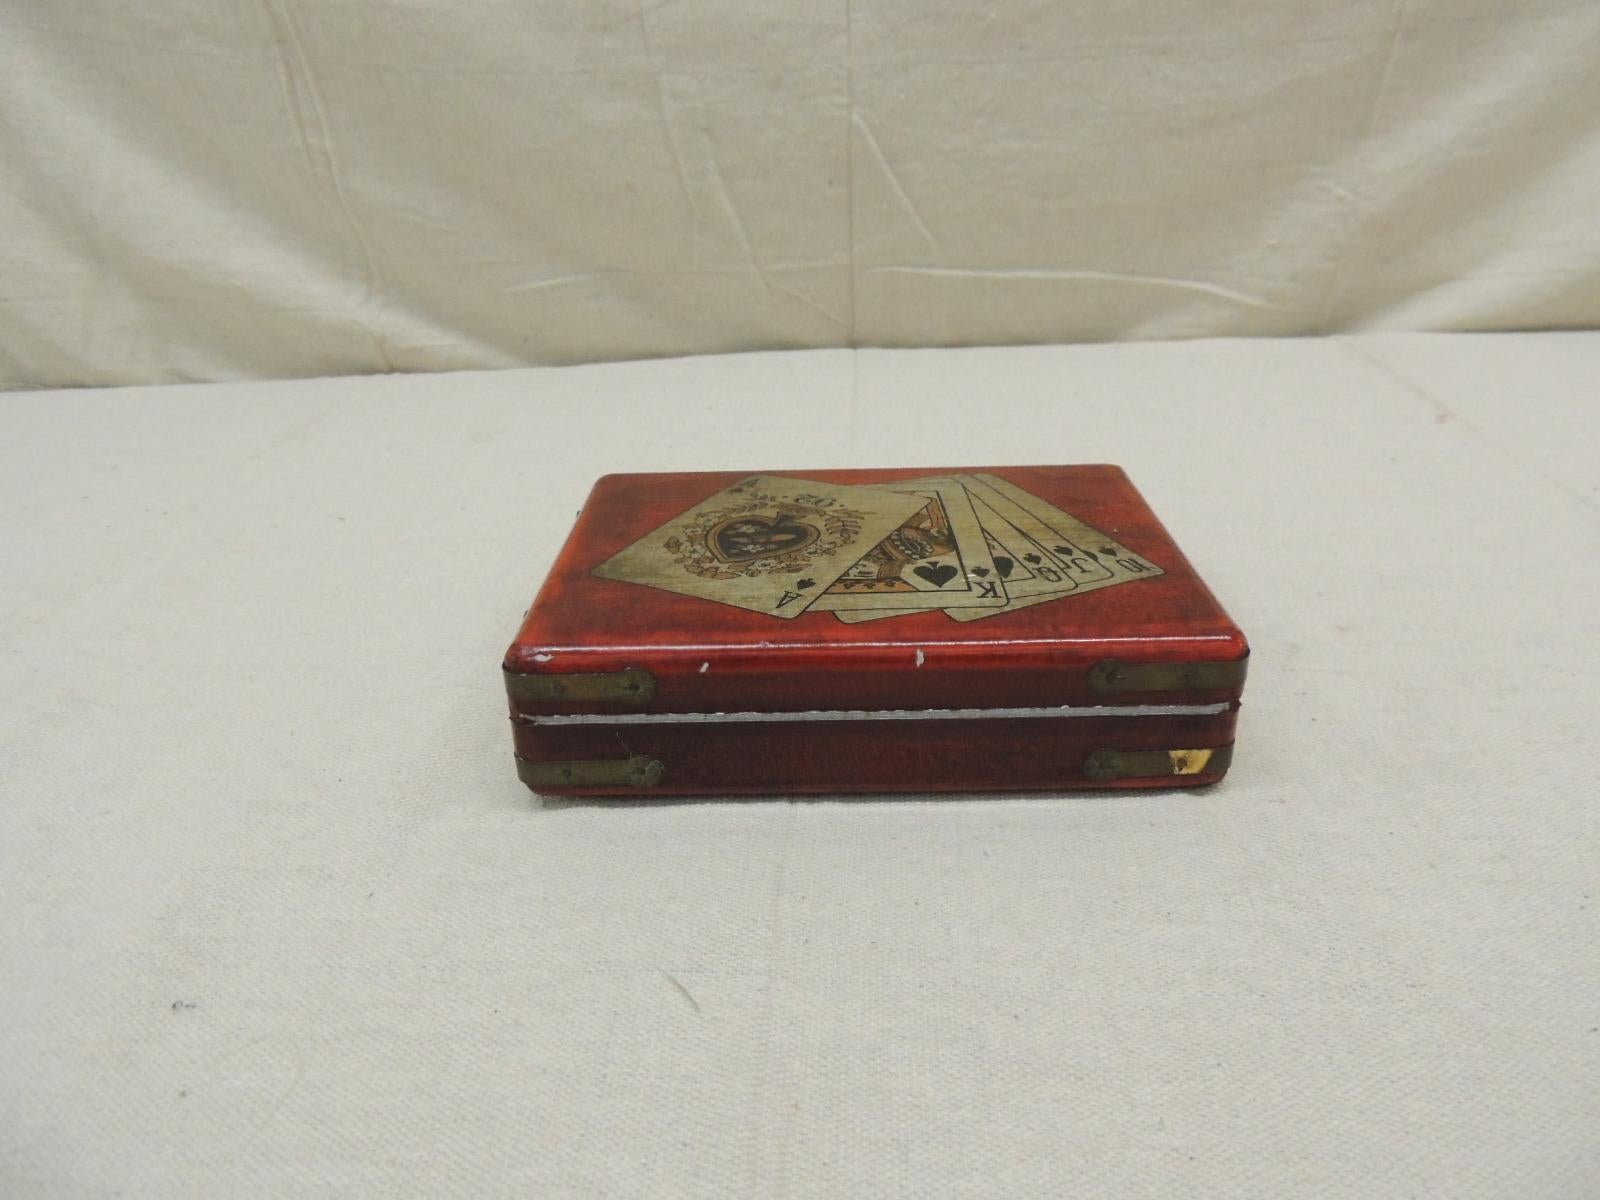 Hand-Crafted Vintage Set of Playing Cards in a Lacquered Wood Box